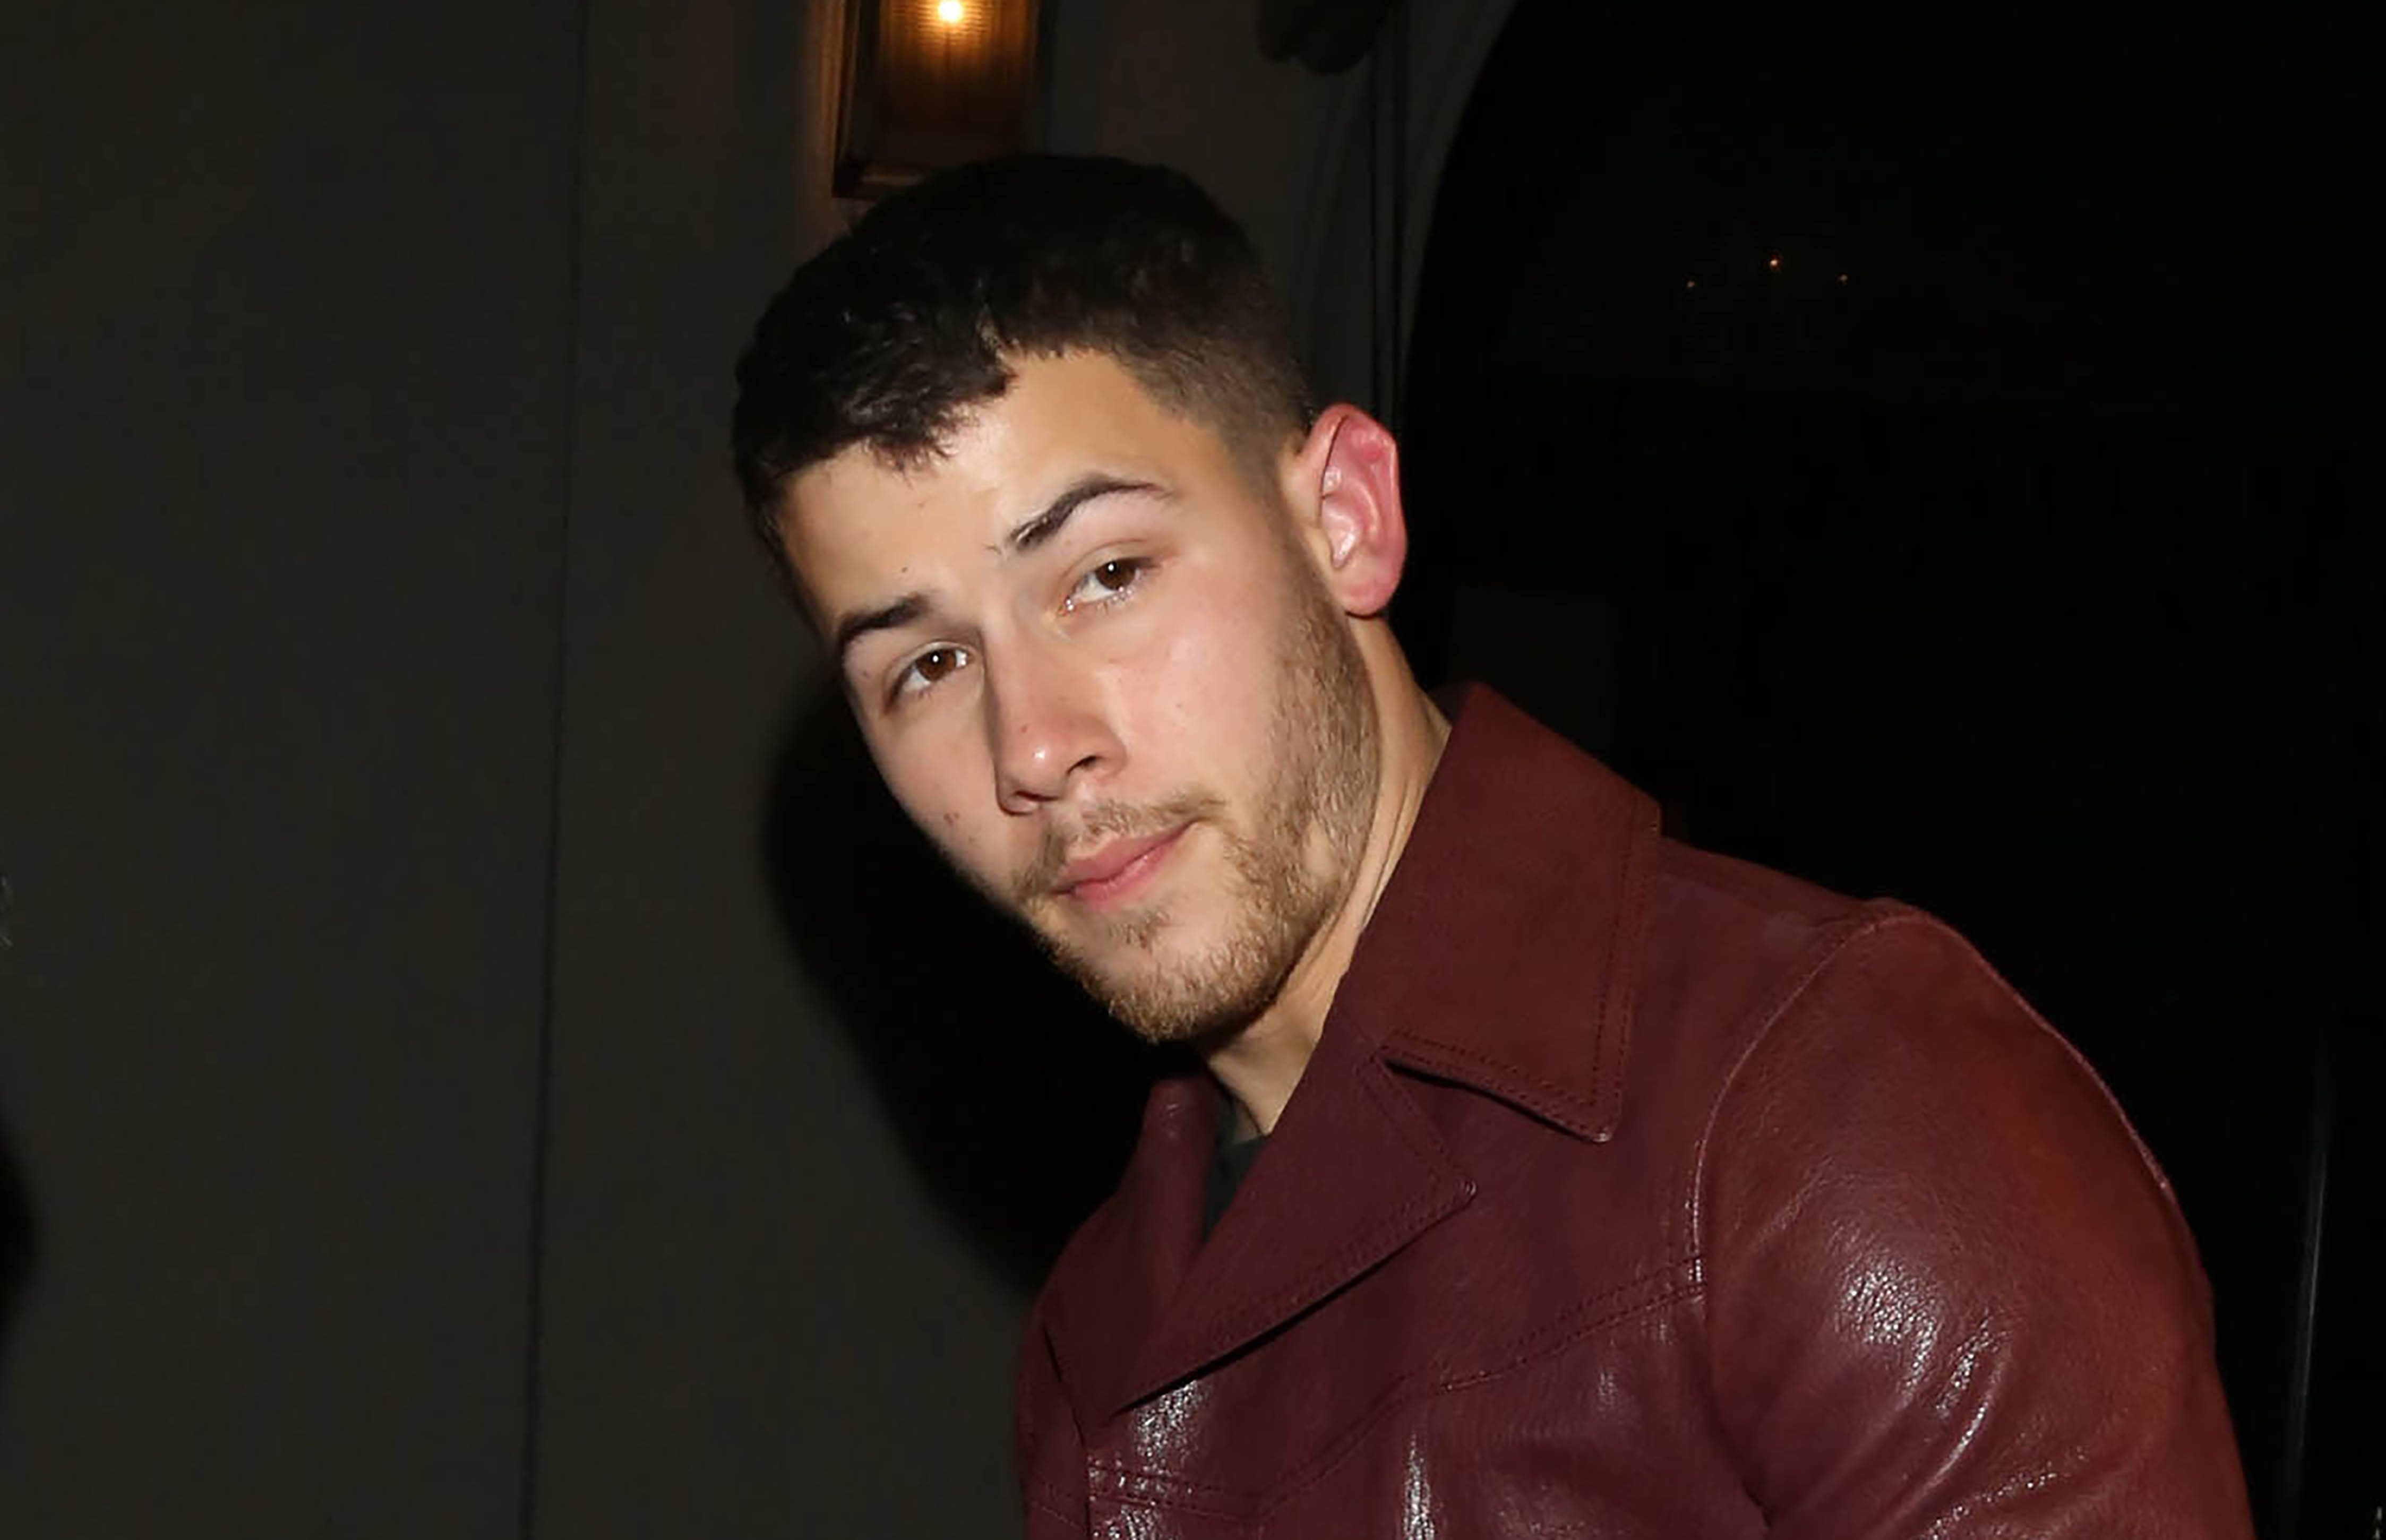 Nick Jonas Spills About How Fame Got to His Head While on a Date